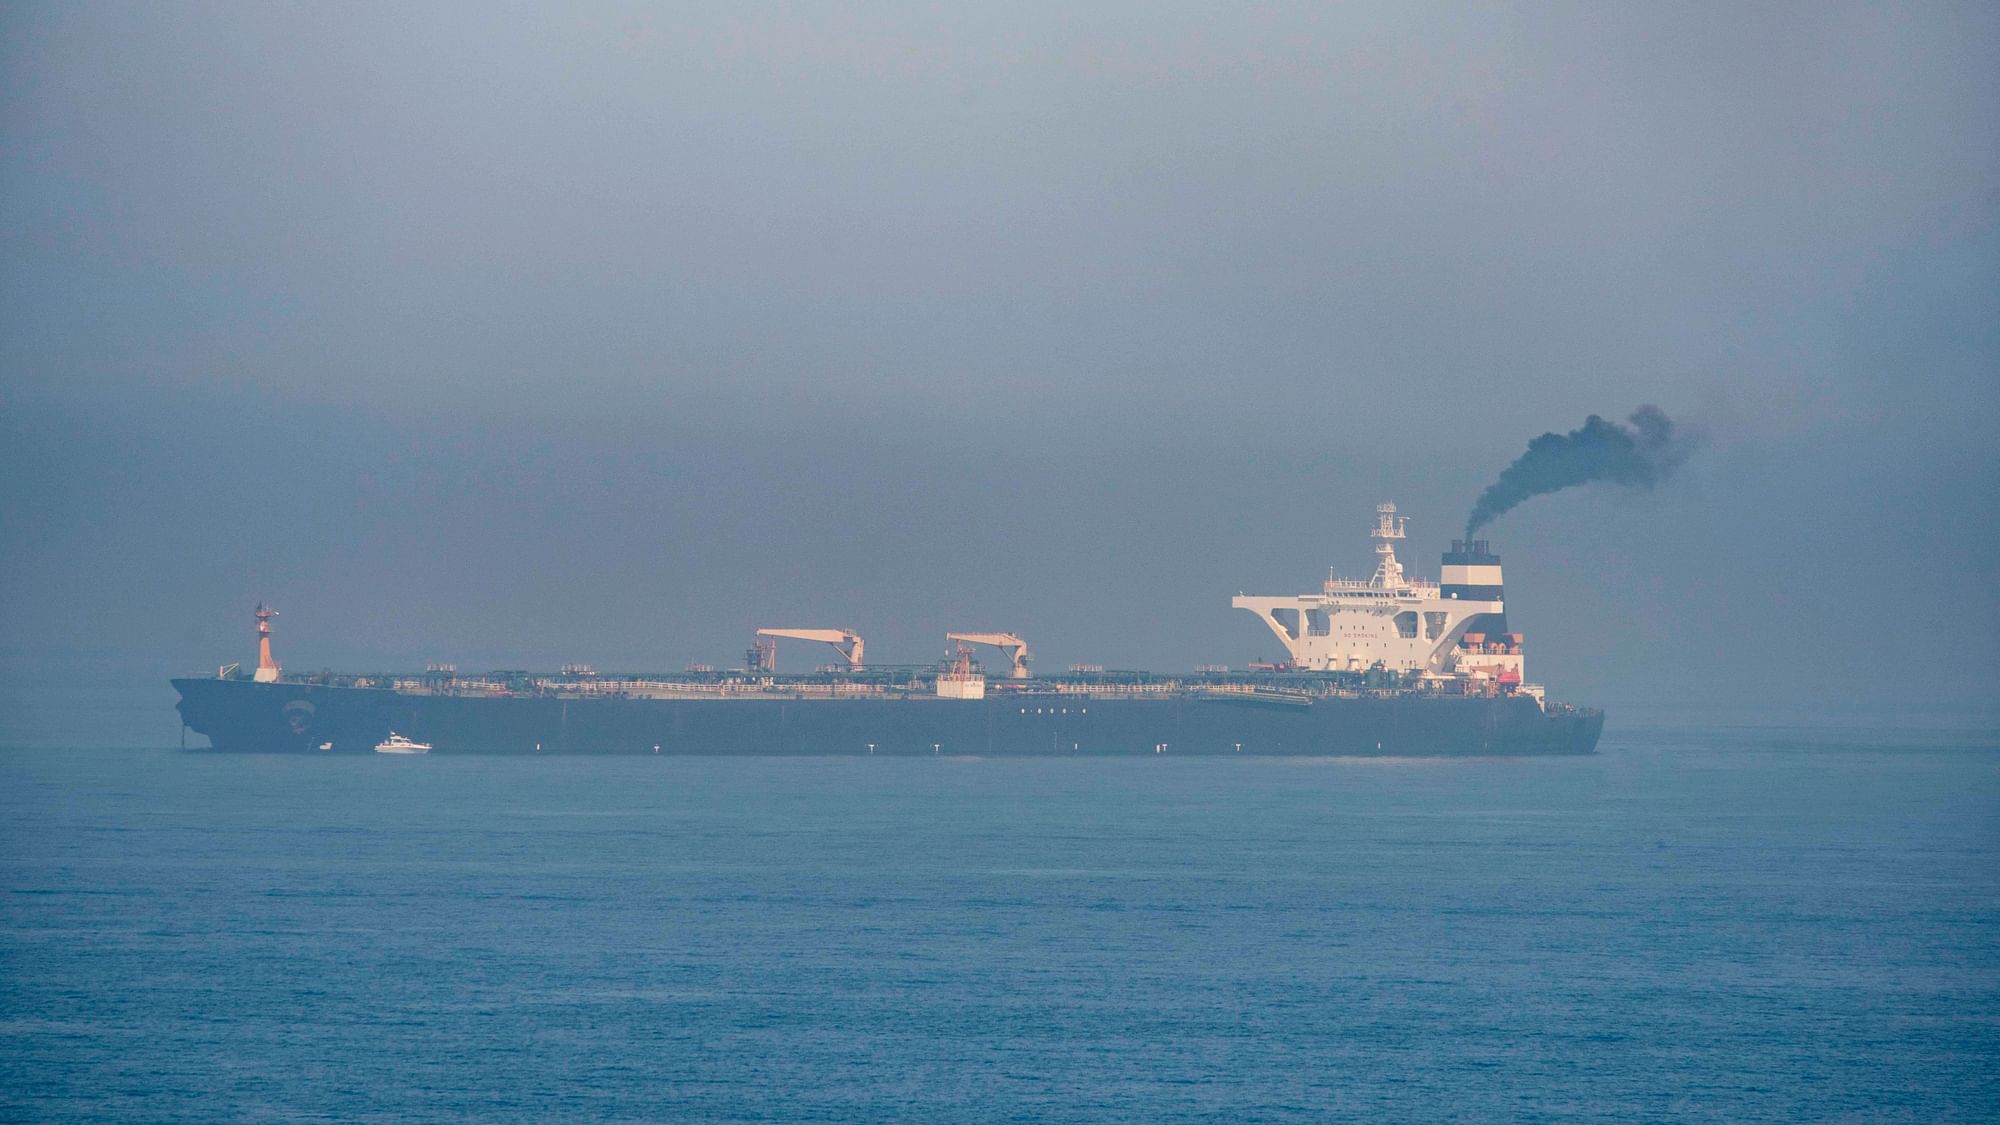  A view of the Grace 1 supertanker in the British territory of Gibraltar. The tanker was seized last month in a British Royal Navy operation off Gibraltar.&nbsp;